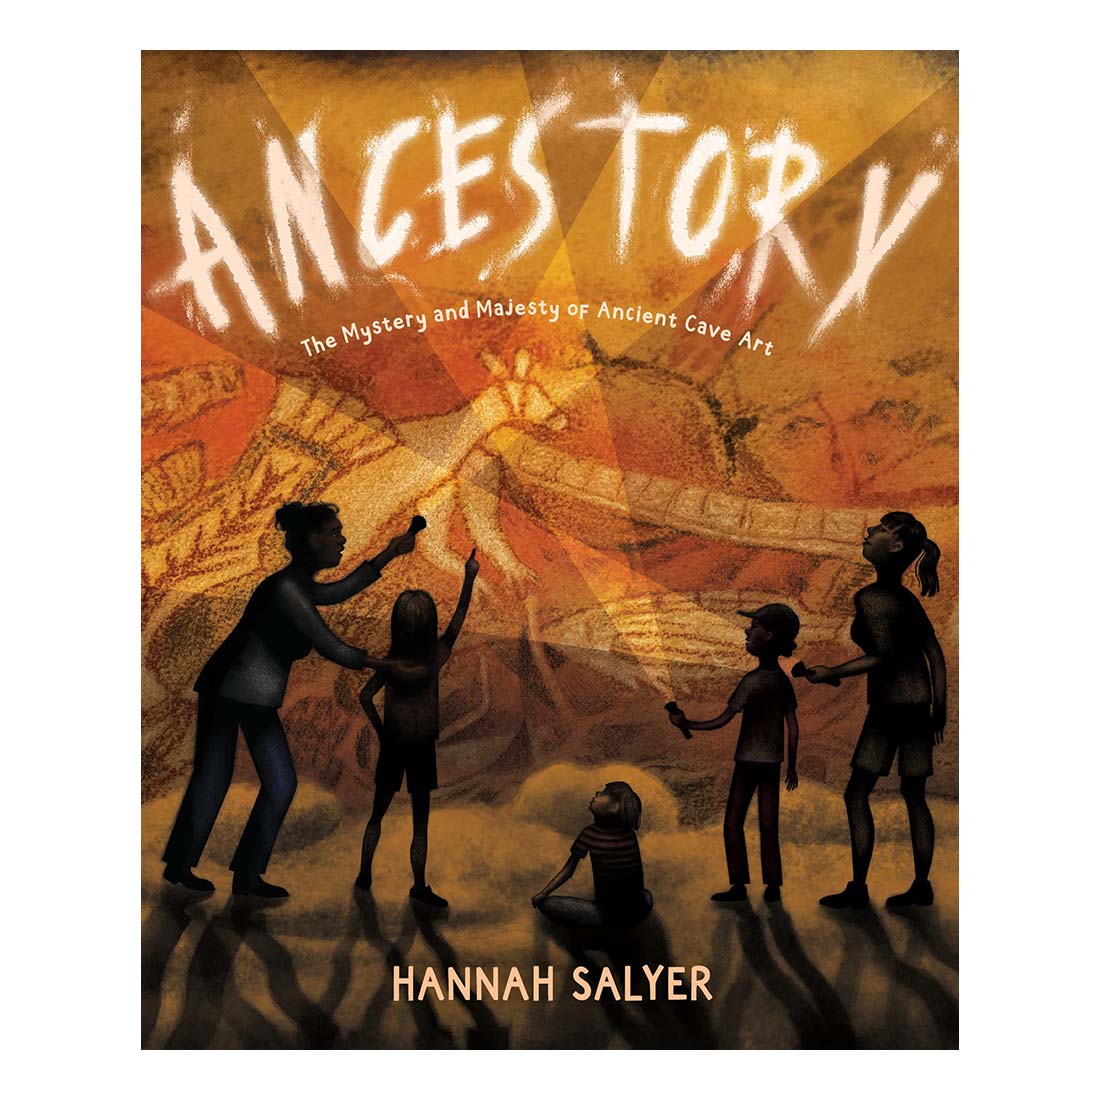 Ancestry: The Mystery and Majesty of Ancient Cave Art